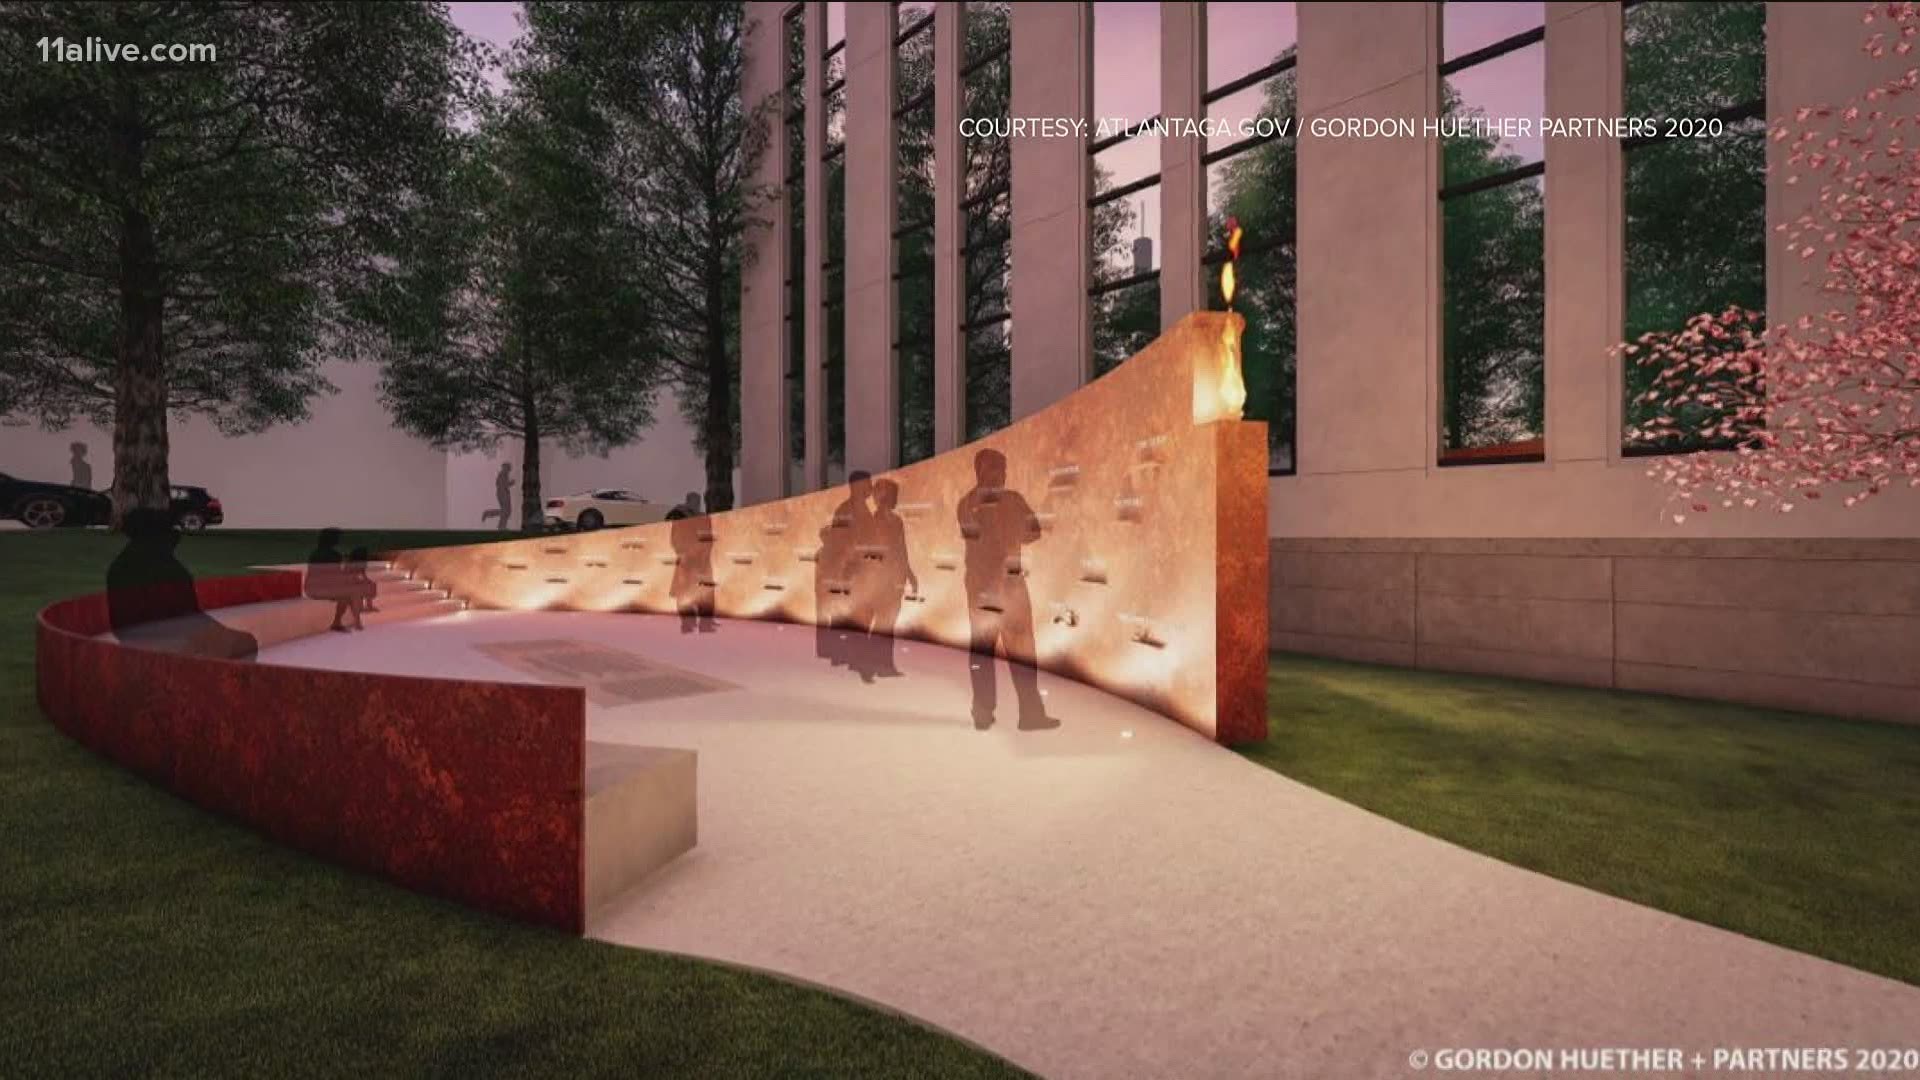 The concept is based around a sweeping steel sculpture with an eternal flame at one end.